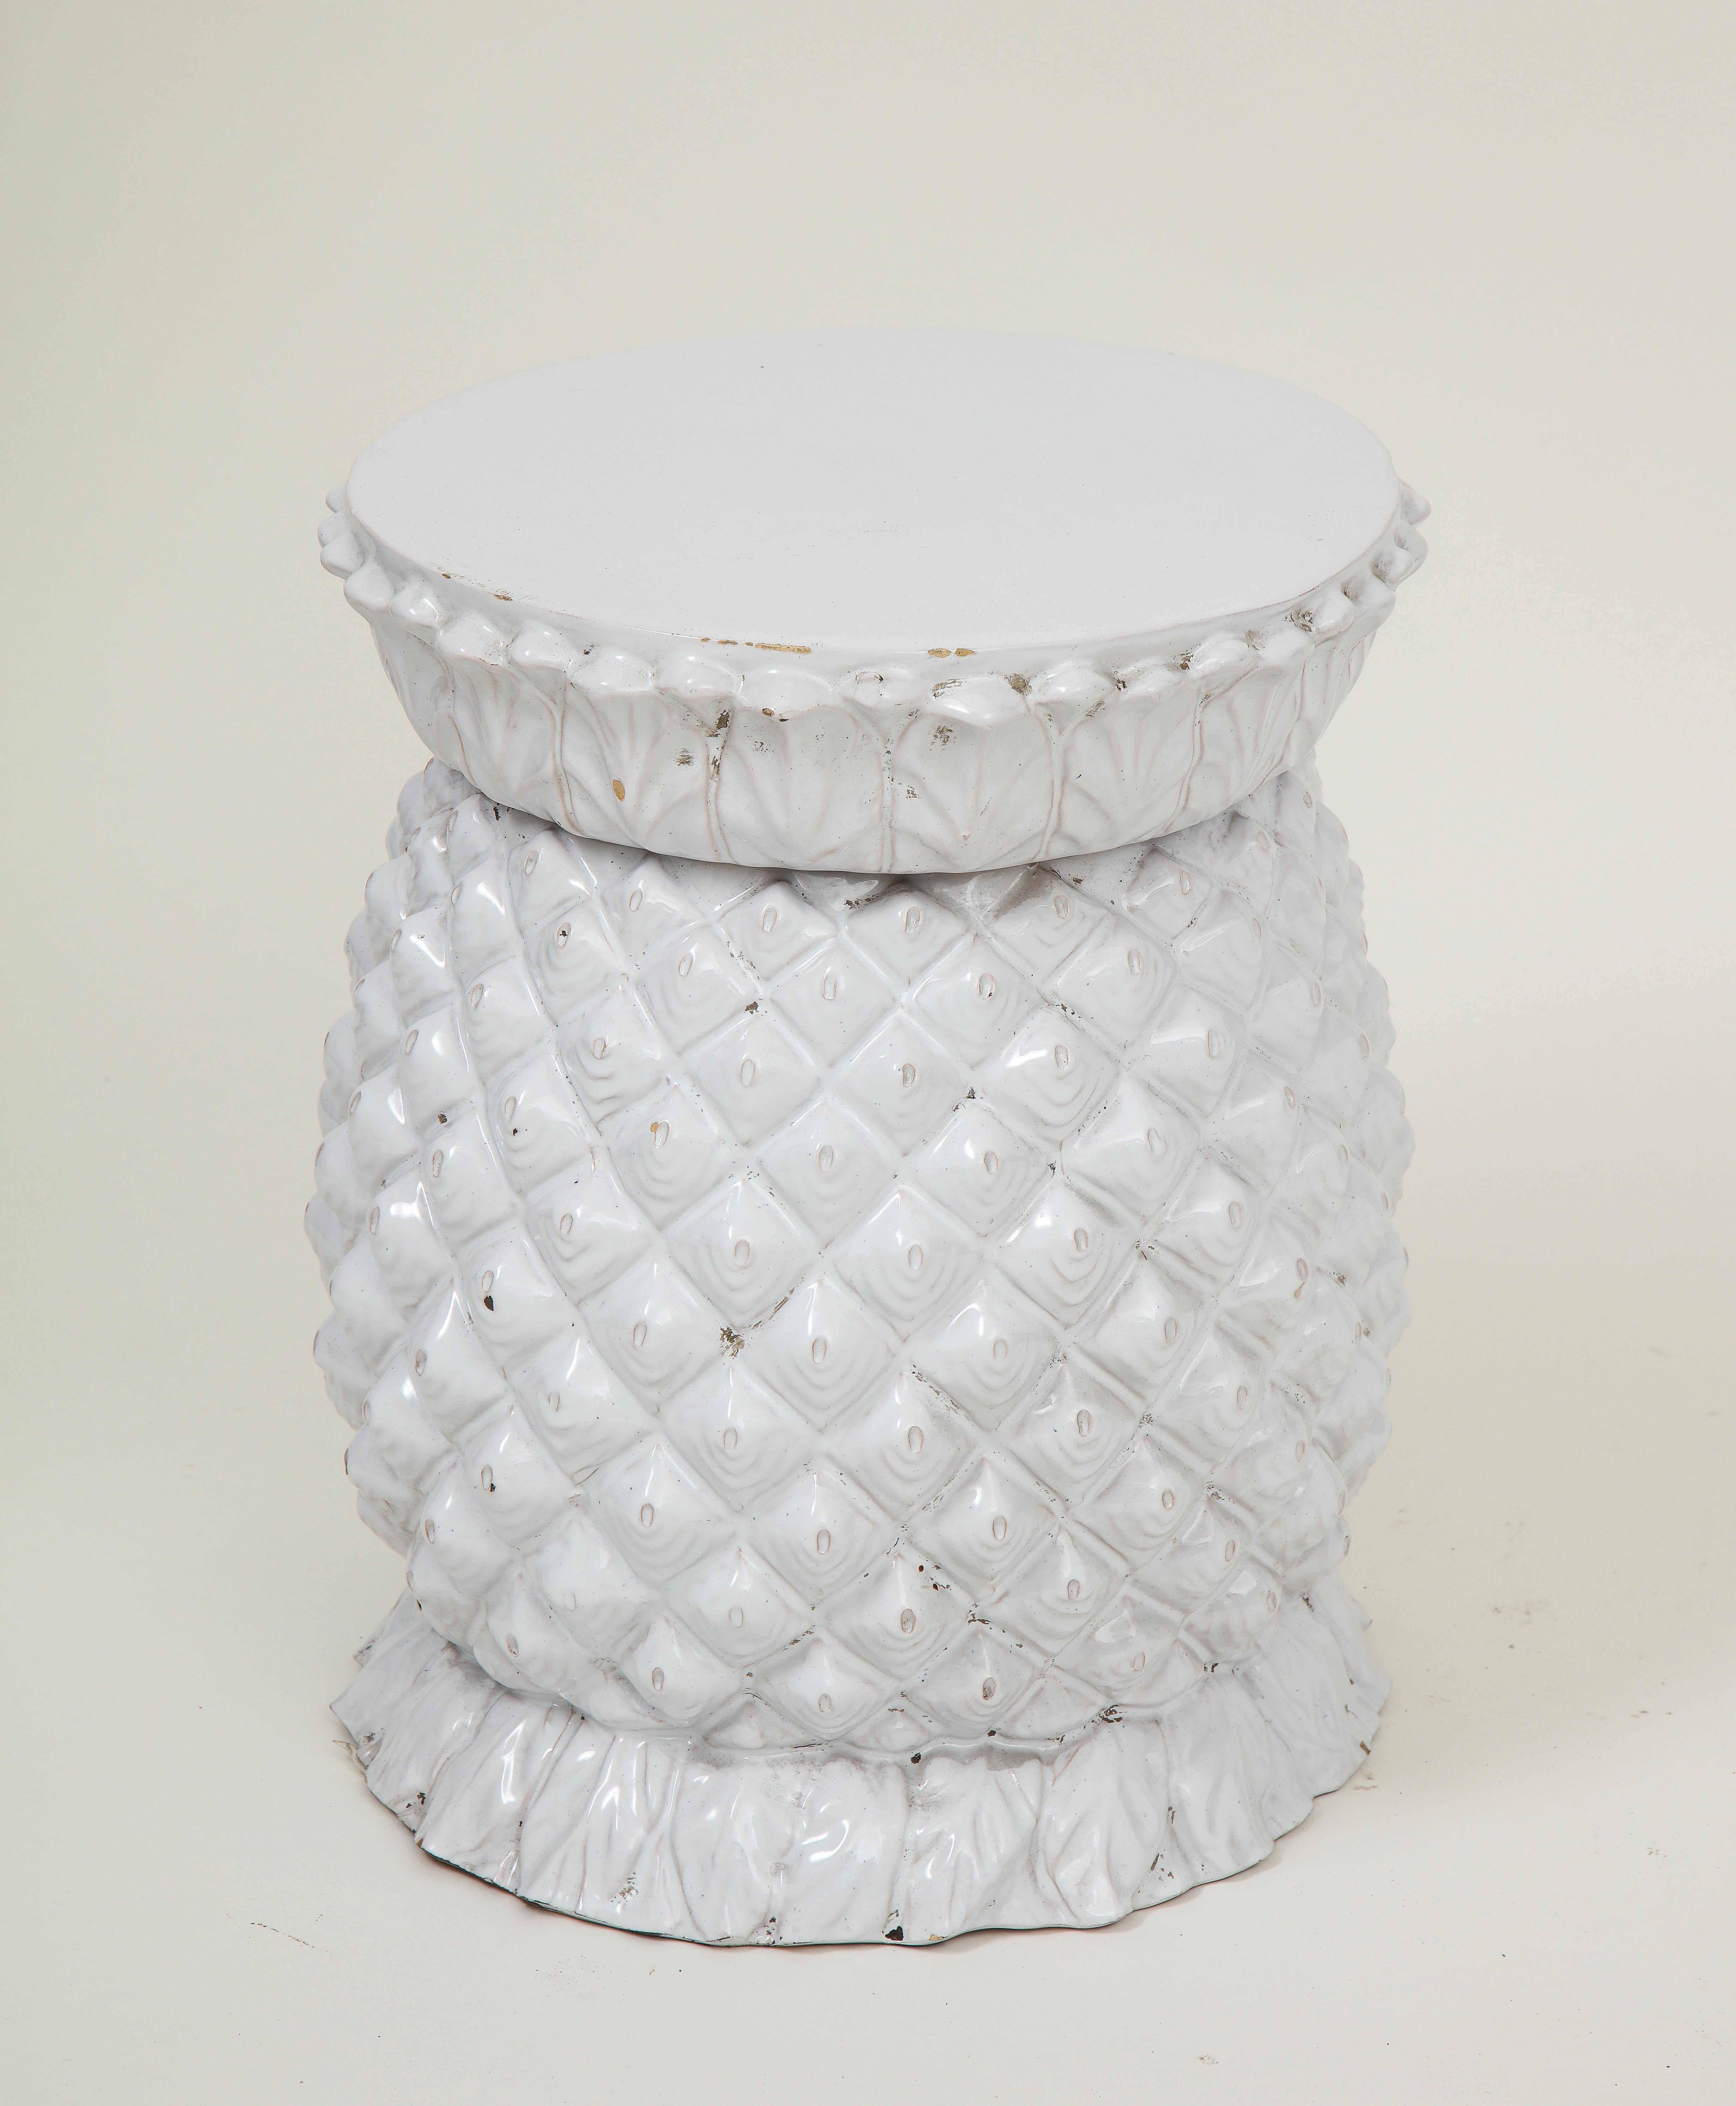 Glazed solid white; of stylized pineapple form. Possibly, 19th century.